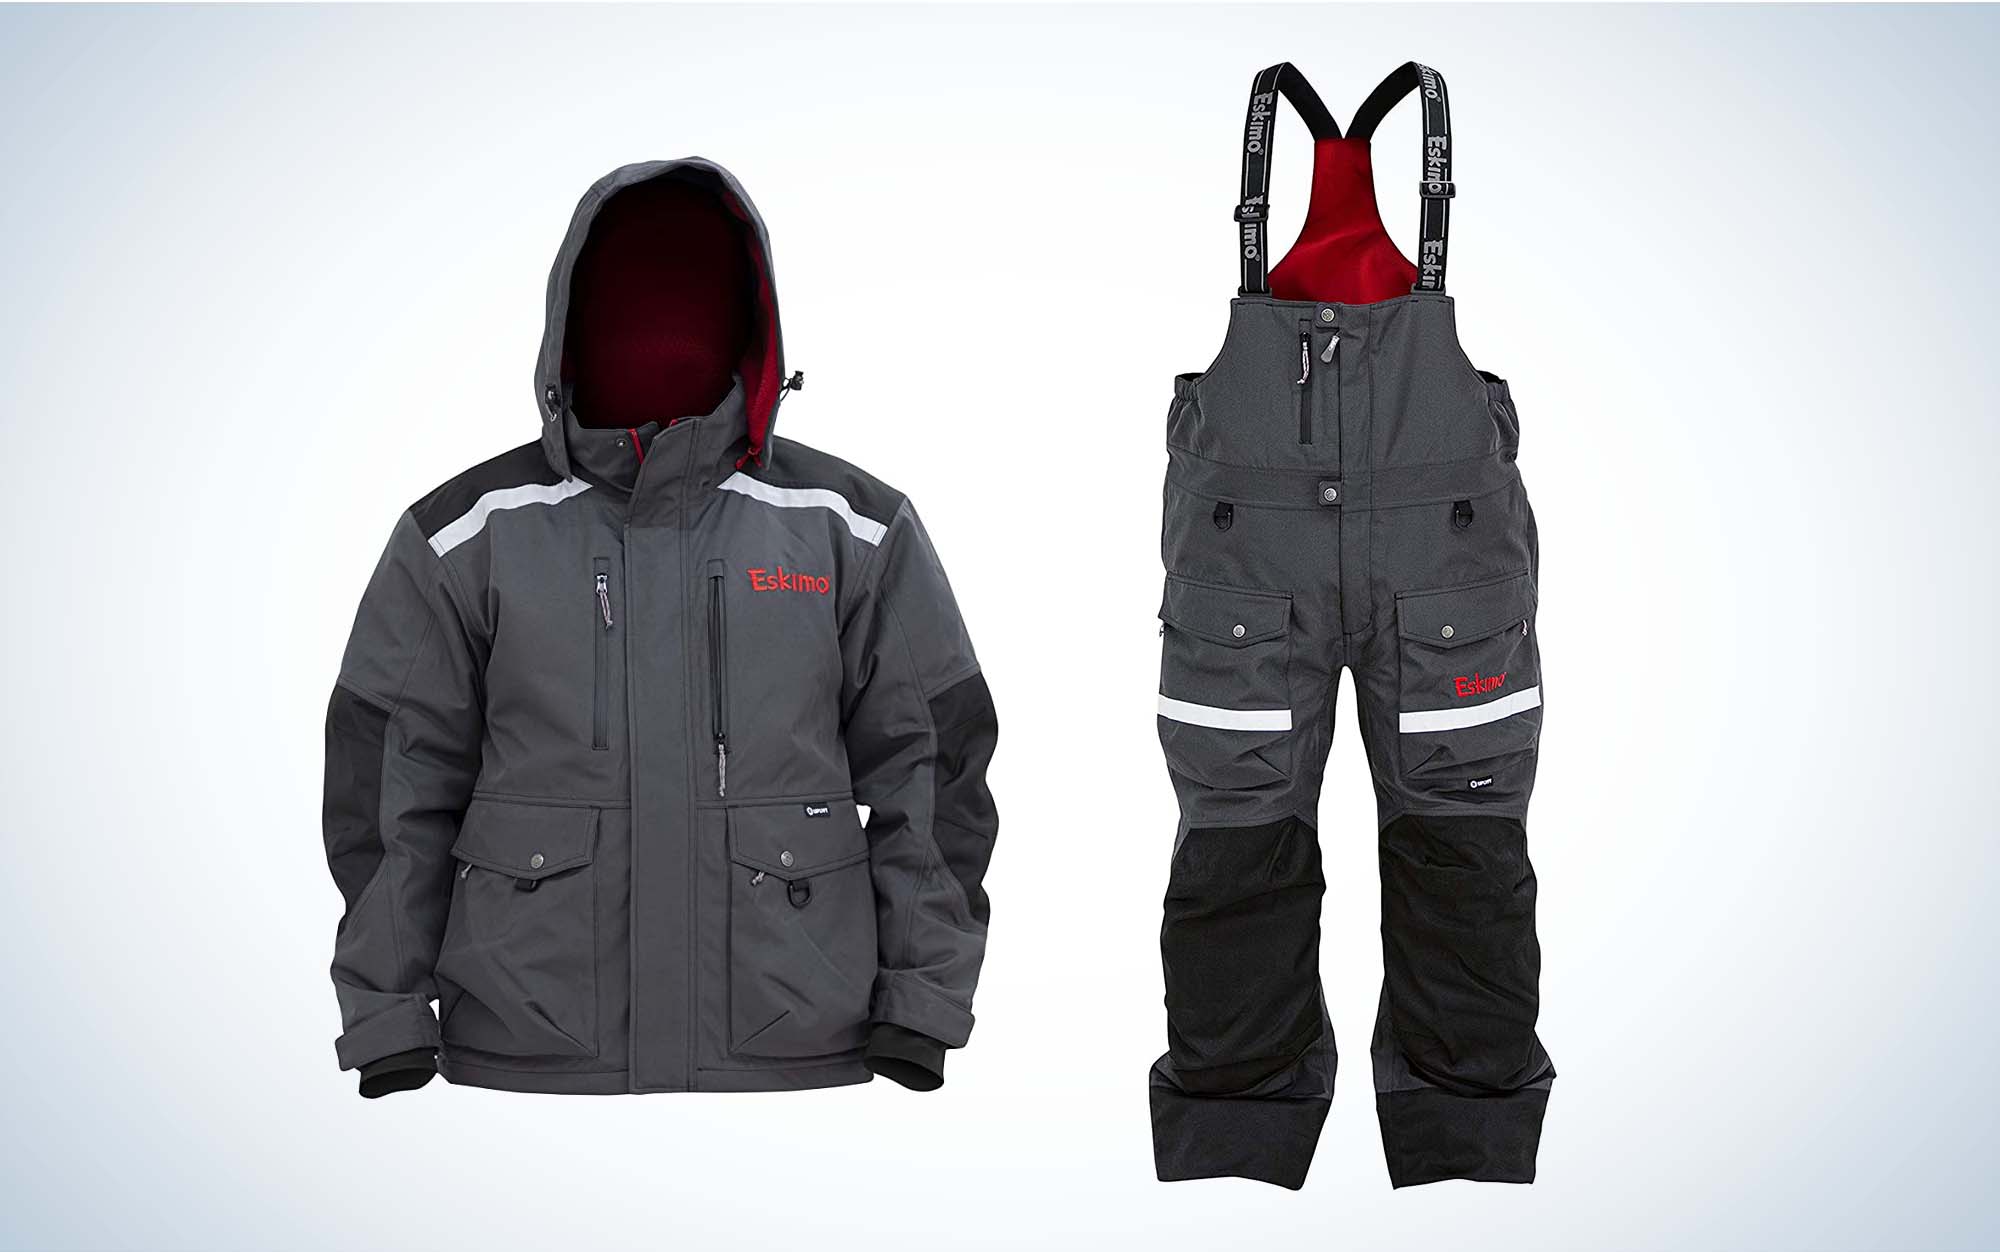 FLOATING ICE FISHING SUIT from Nordic Legend Review #icefishing